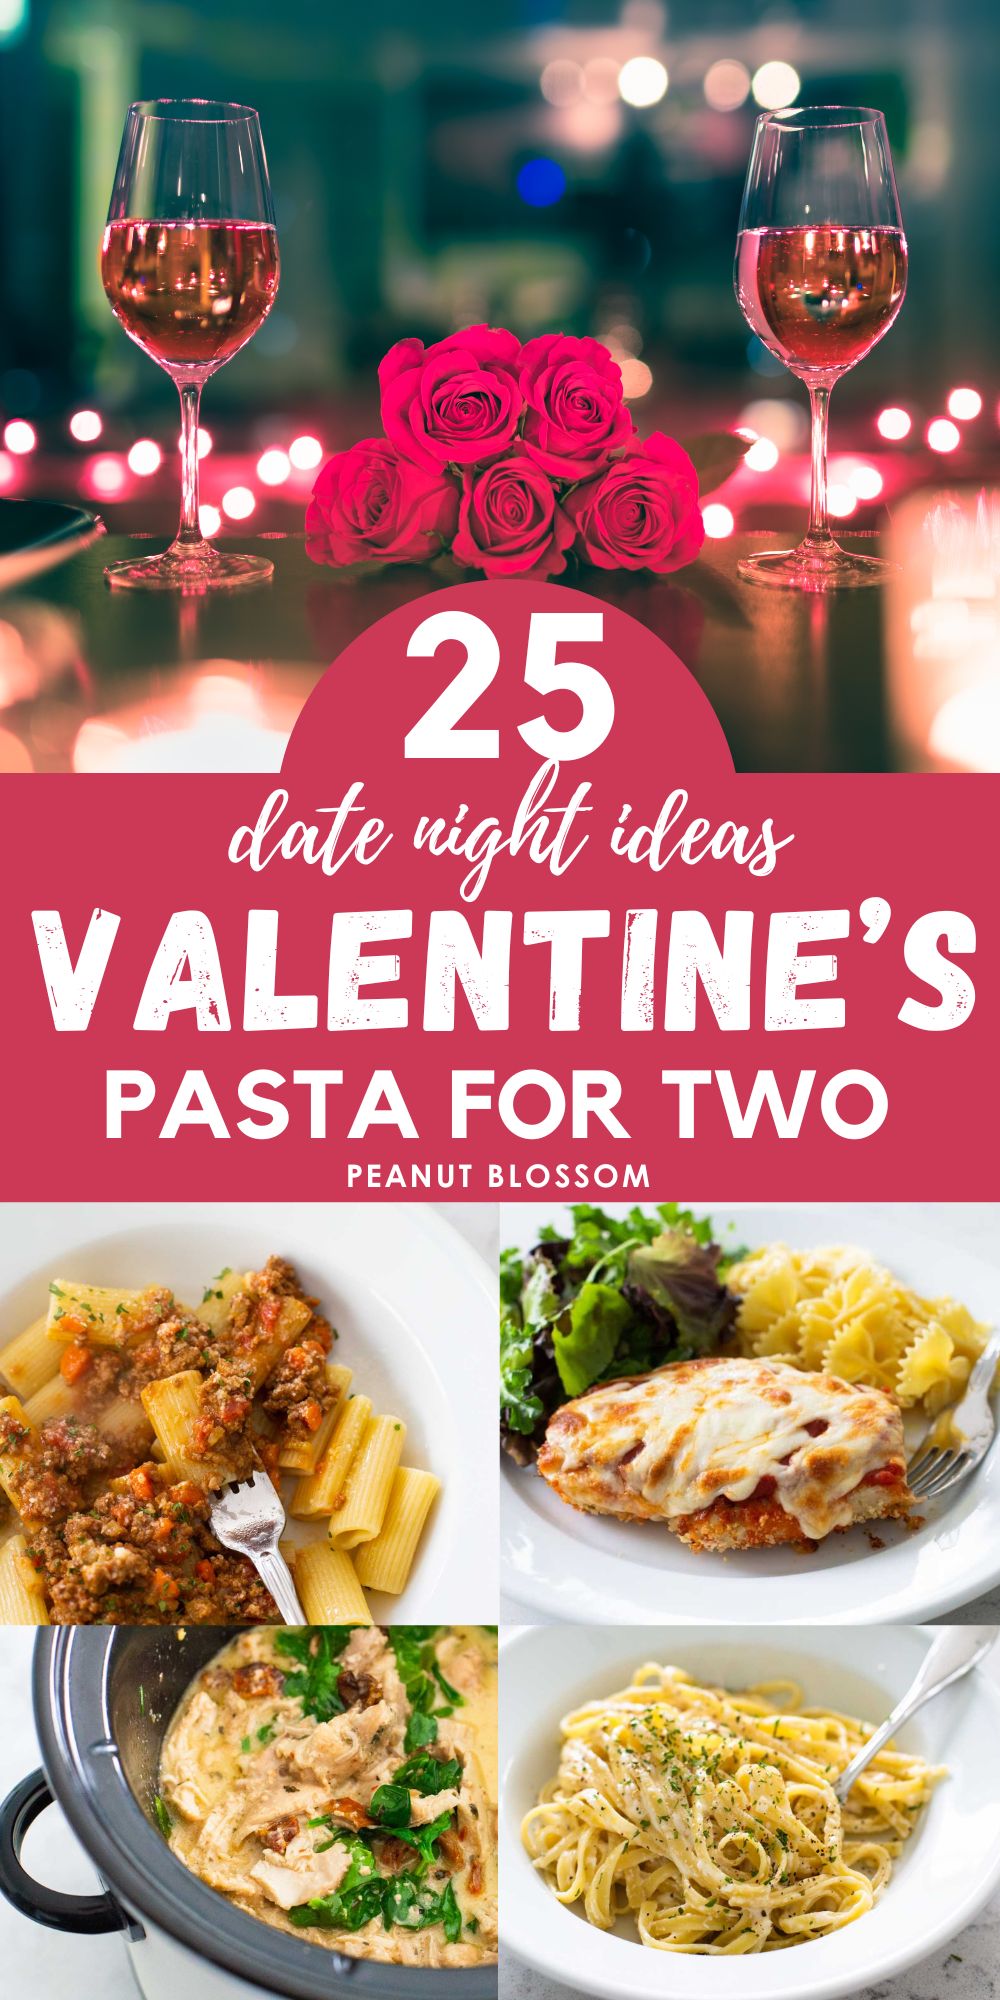 The photo collage shows a romantic dinner with roses, wine, and candles, next to 4 photos of pasta recipes for two people.